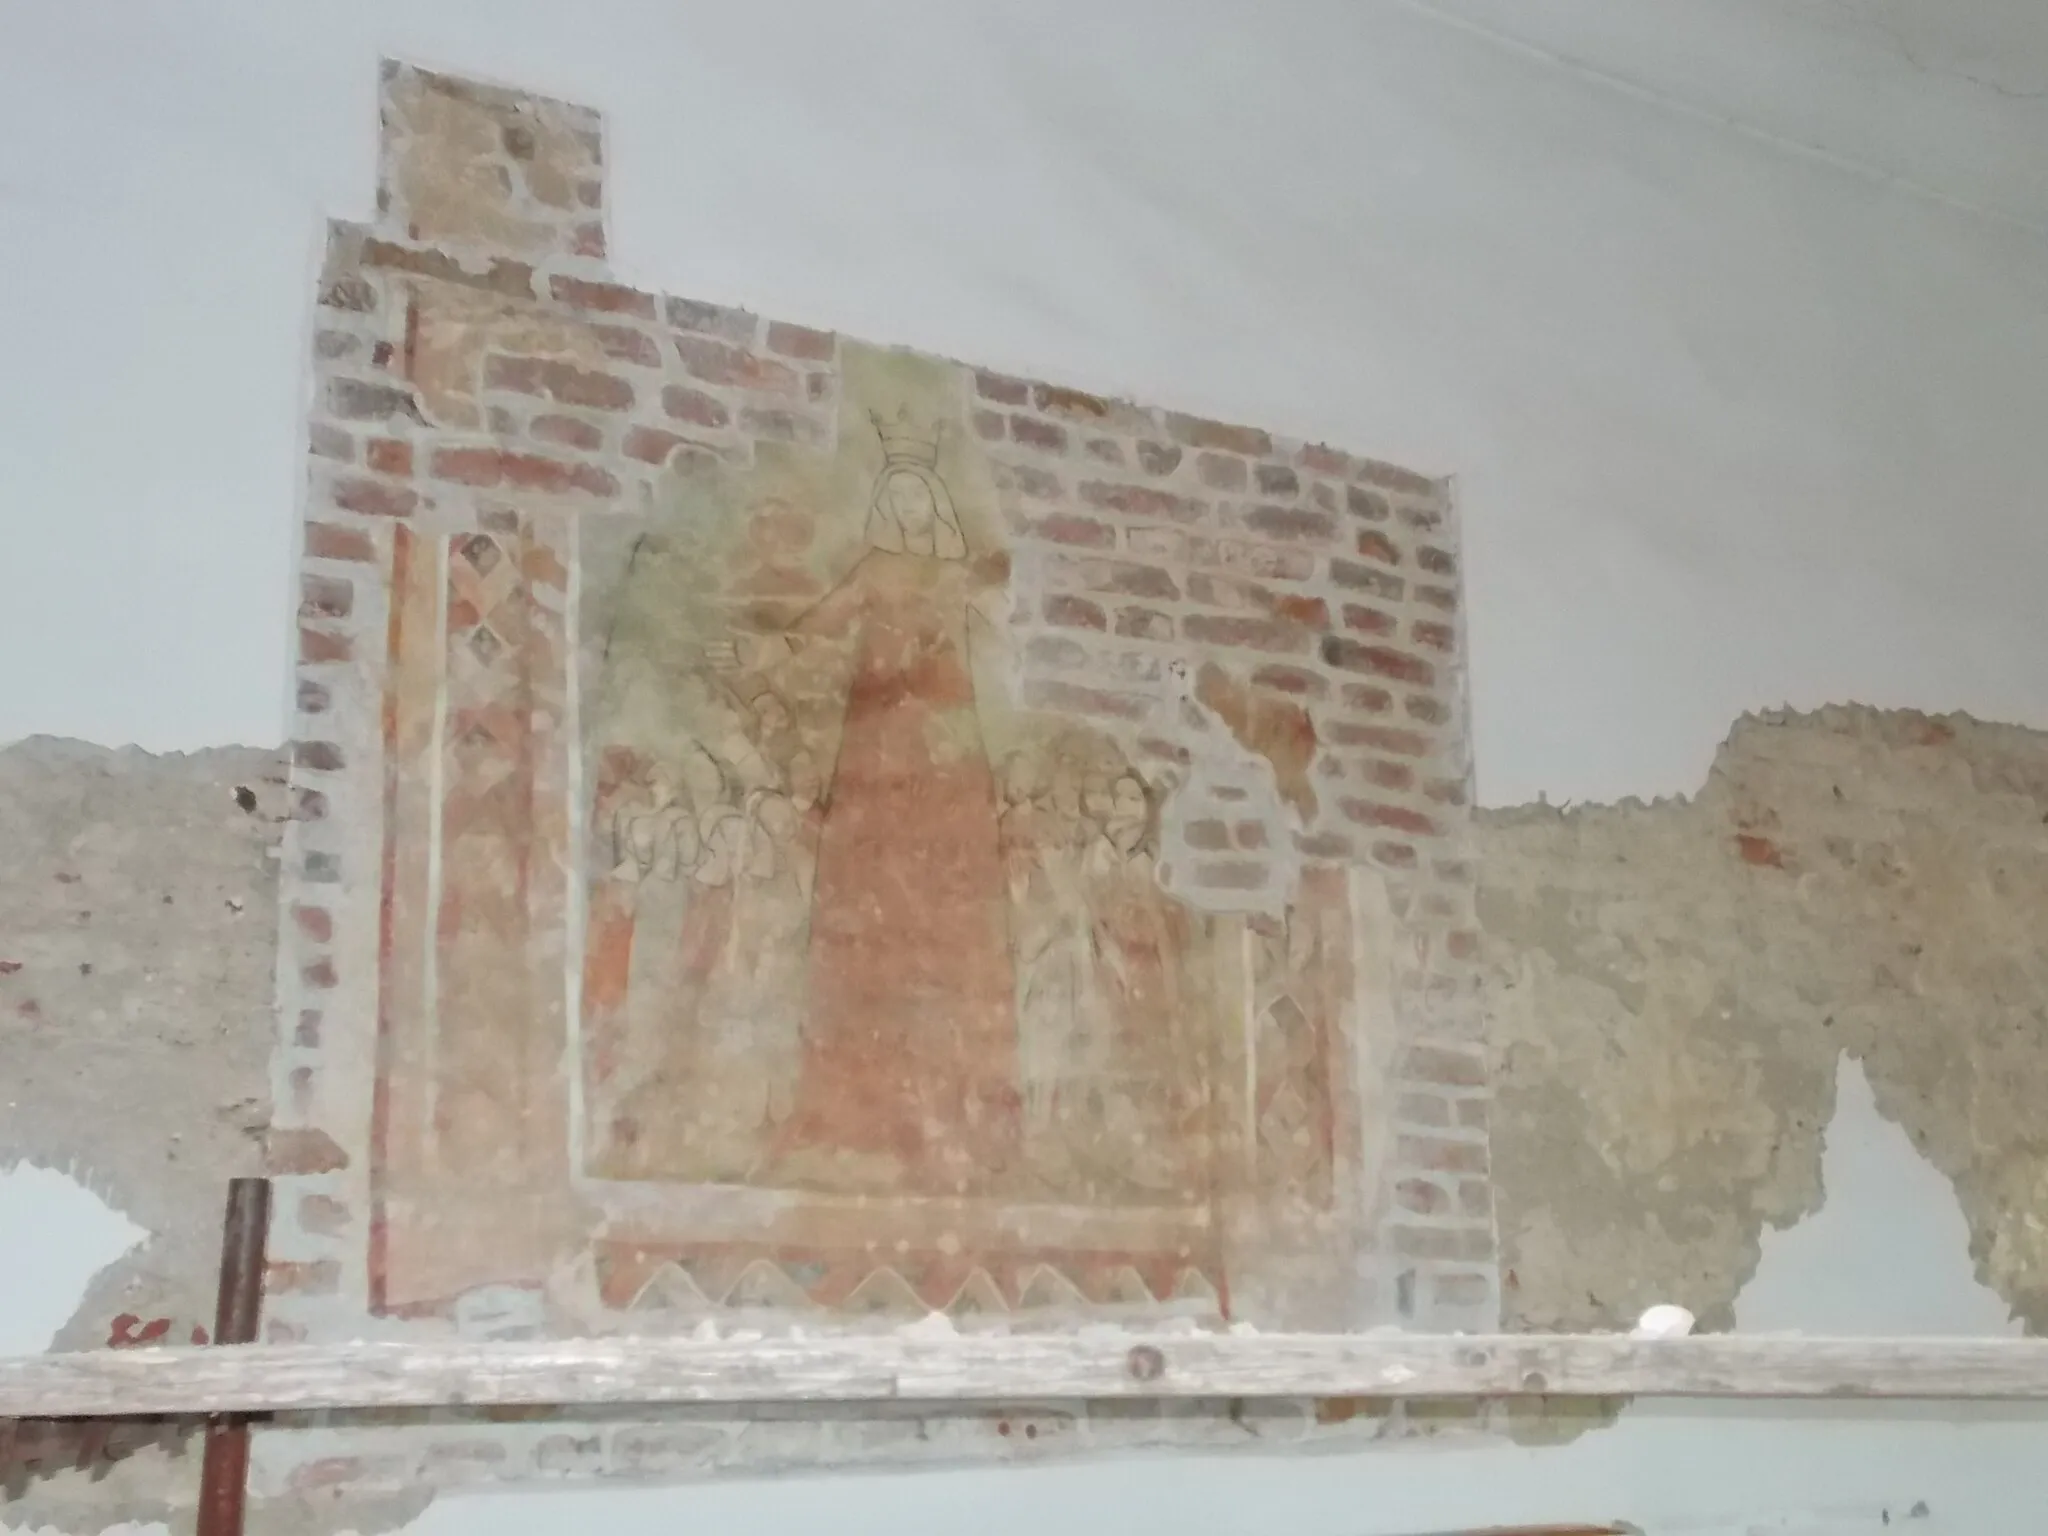 Photo showing: : Immaculate Conception RC church. Inside: Gothic fresco fragments (15th century). The church was under renovation (2017 summer). - Kossuth square, Máriapócs, Szabolcs-Szatmár-Bereg County, Hungary.